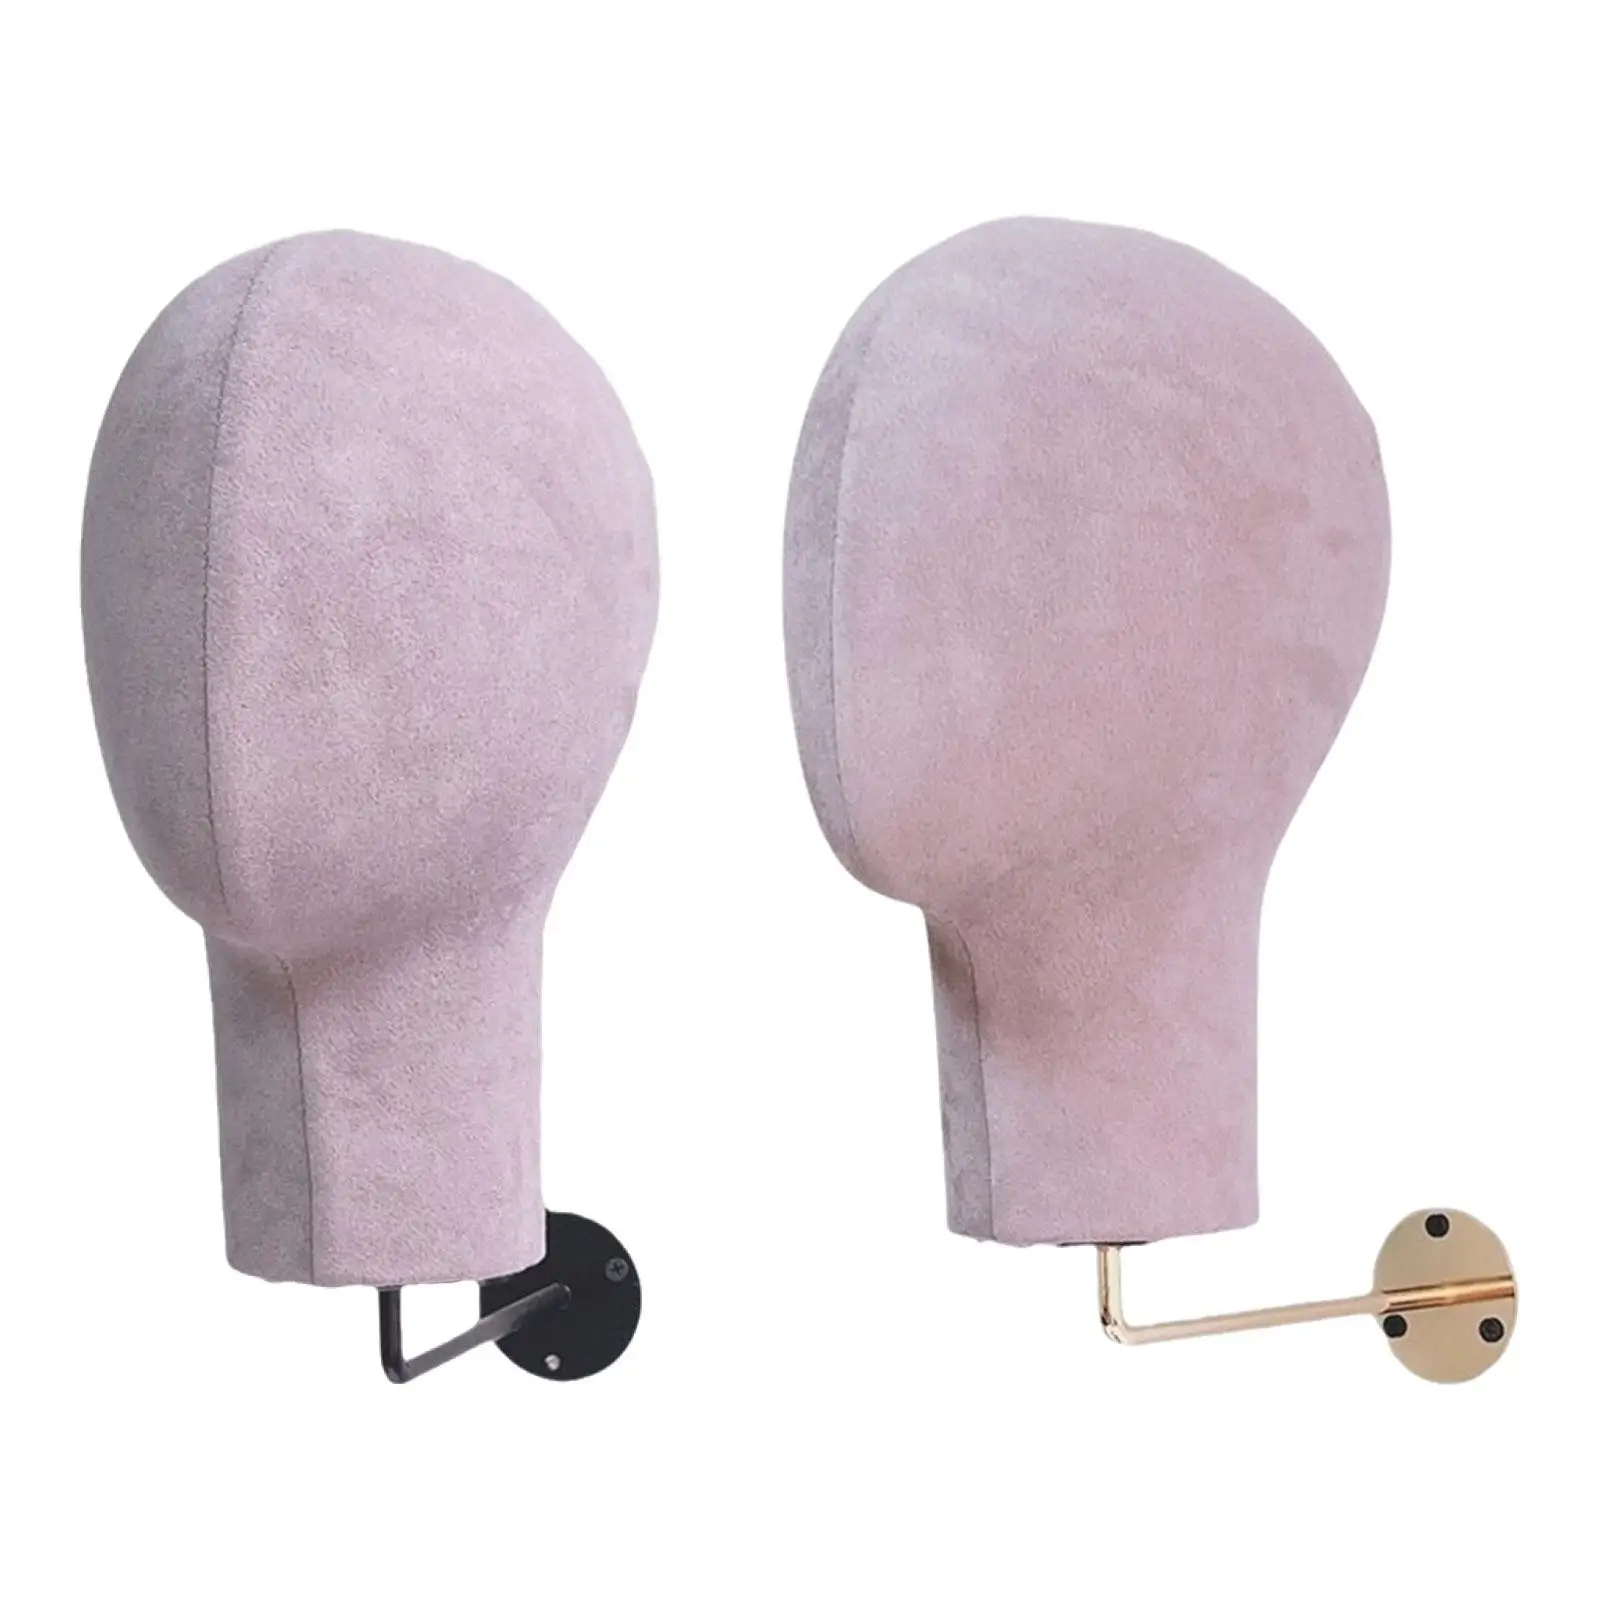 

Mannequin Head Wall Mount for Hats Caps Wig Head Stand Prop Rack Storage Hanger Wig Holder Display for Home Salon Headdress